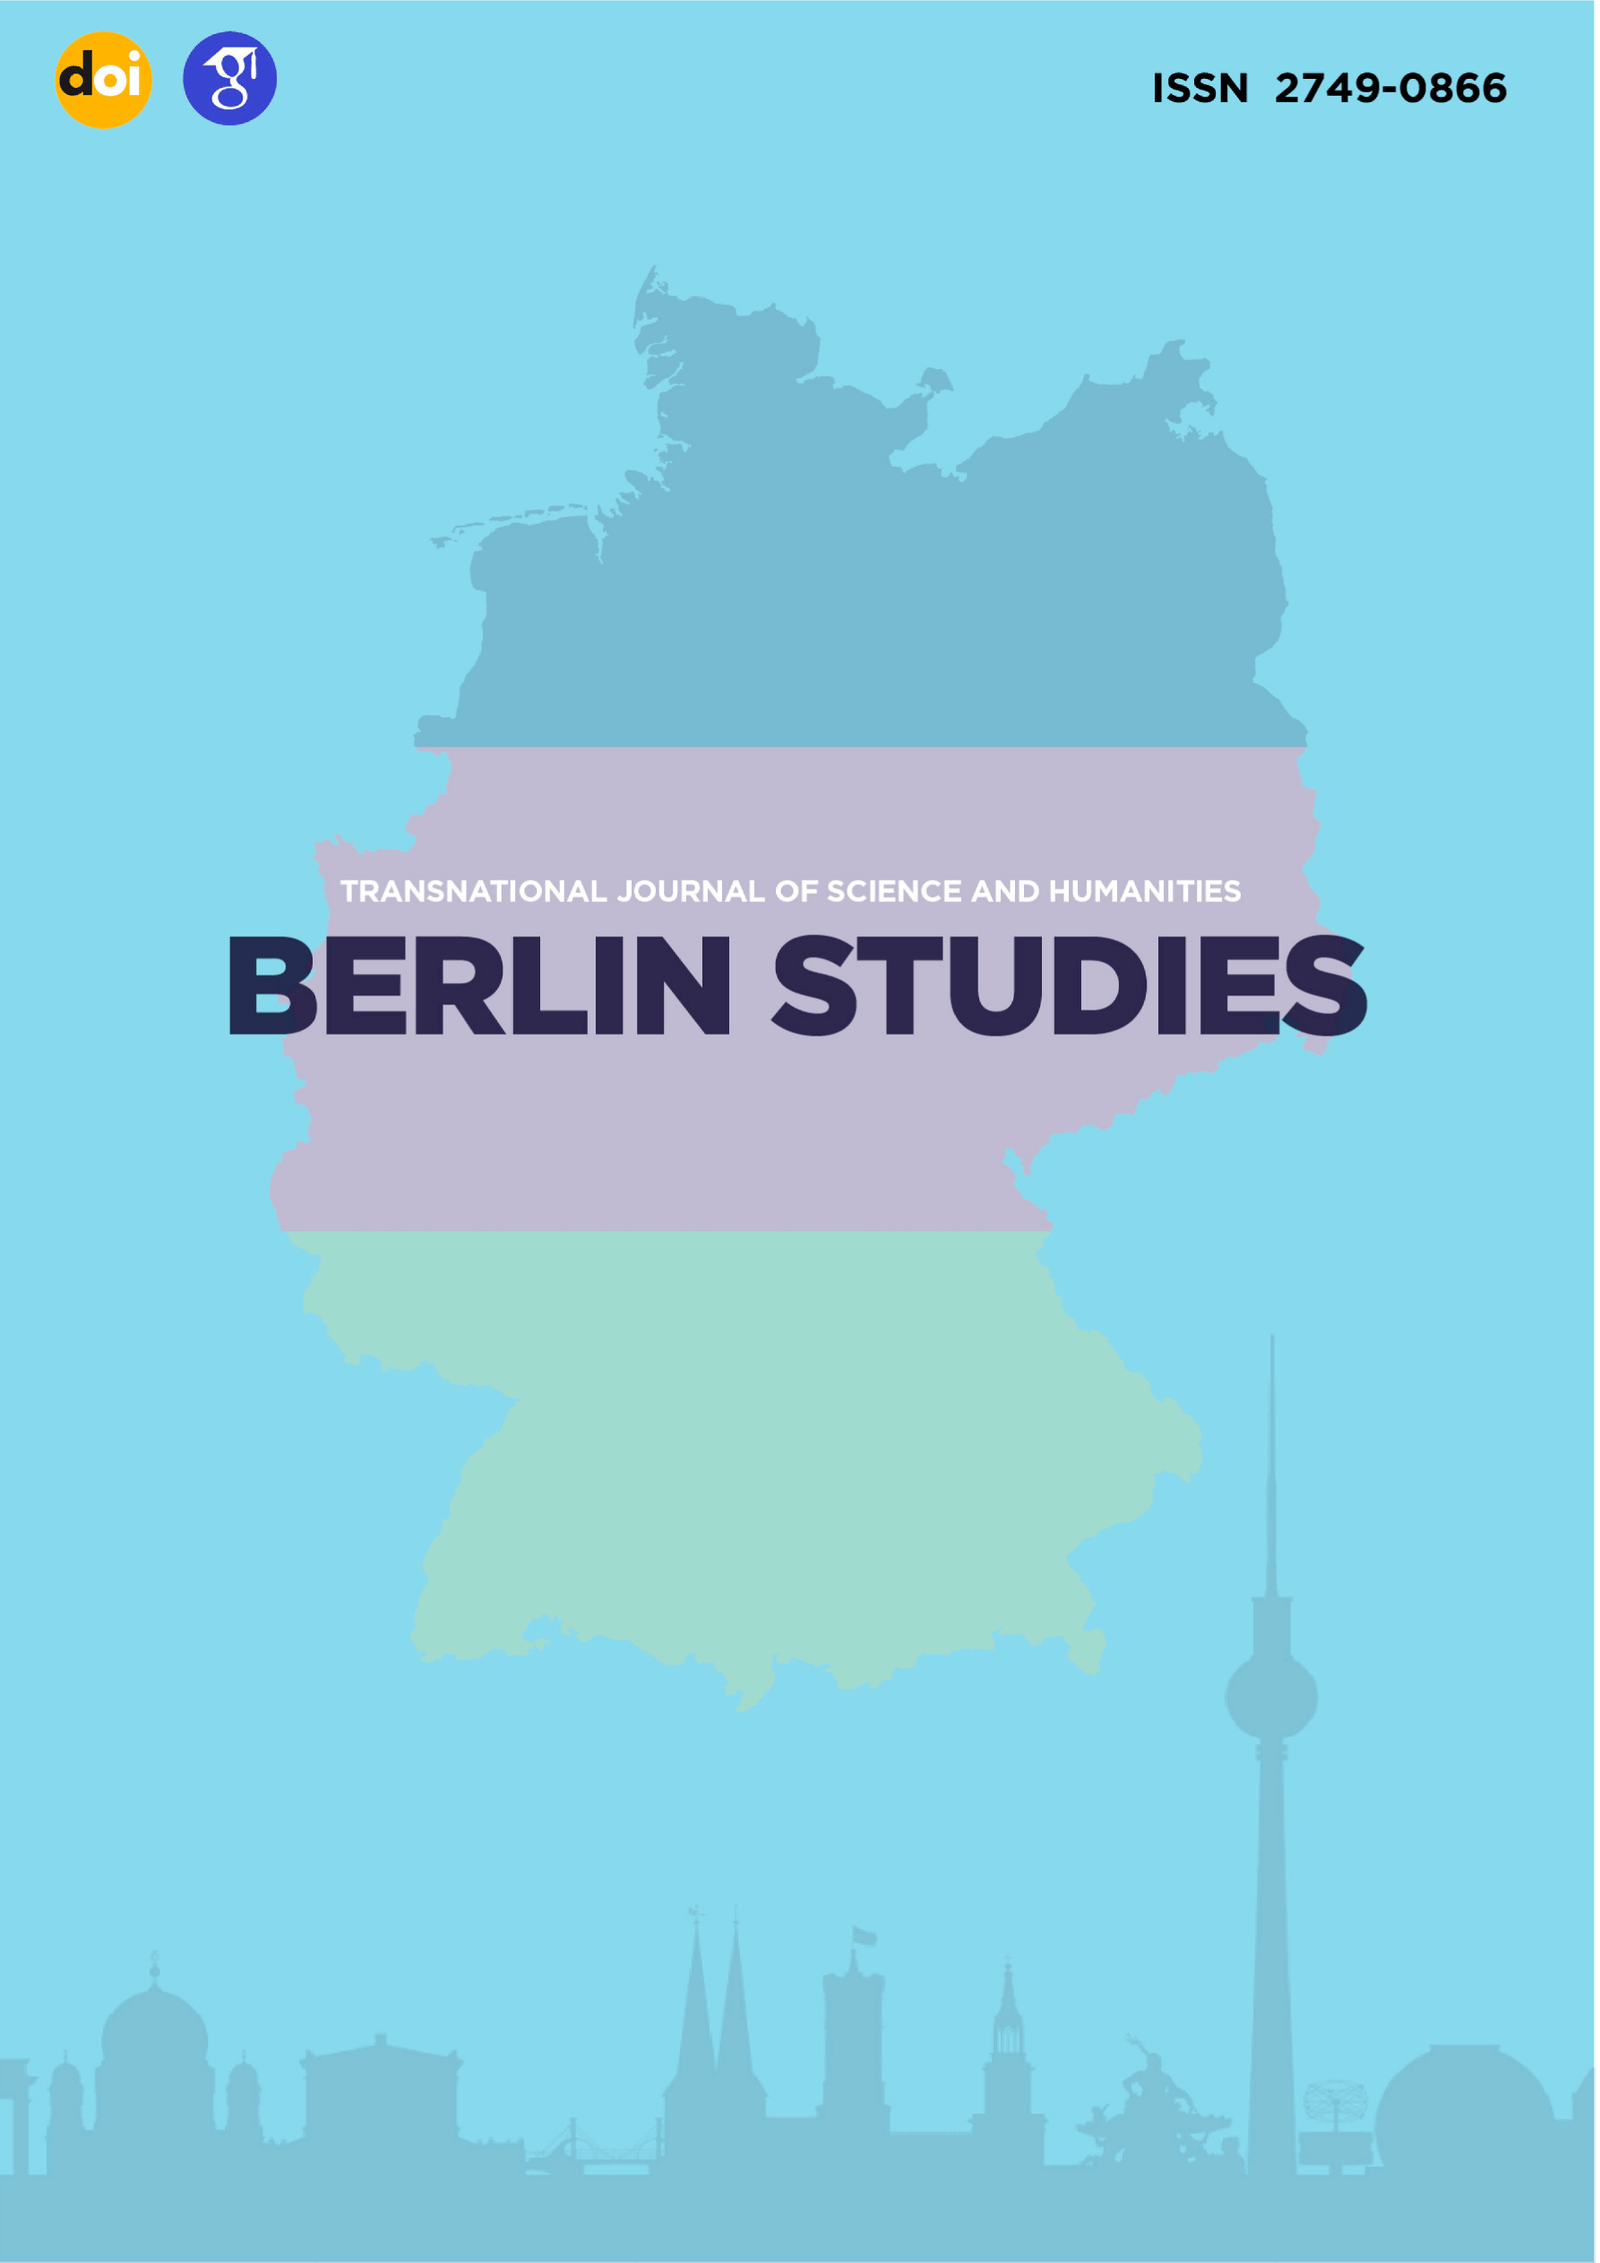 					View Vol. 1 No. 1.1 Economical sciences (2021): Berlin Studies Transnational Journal of Science and Humanities
				